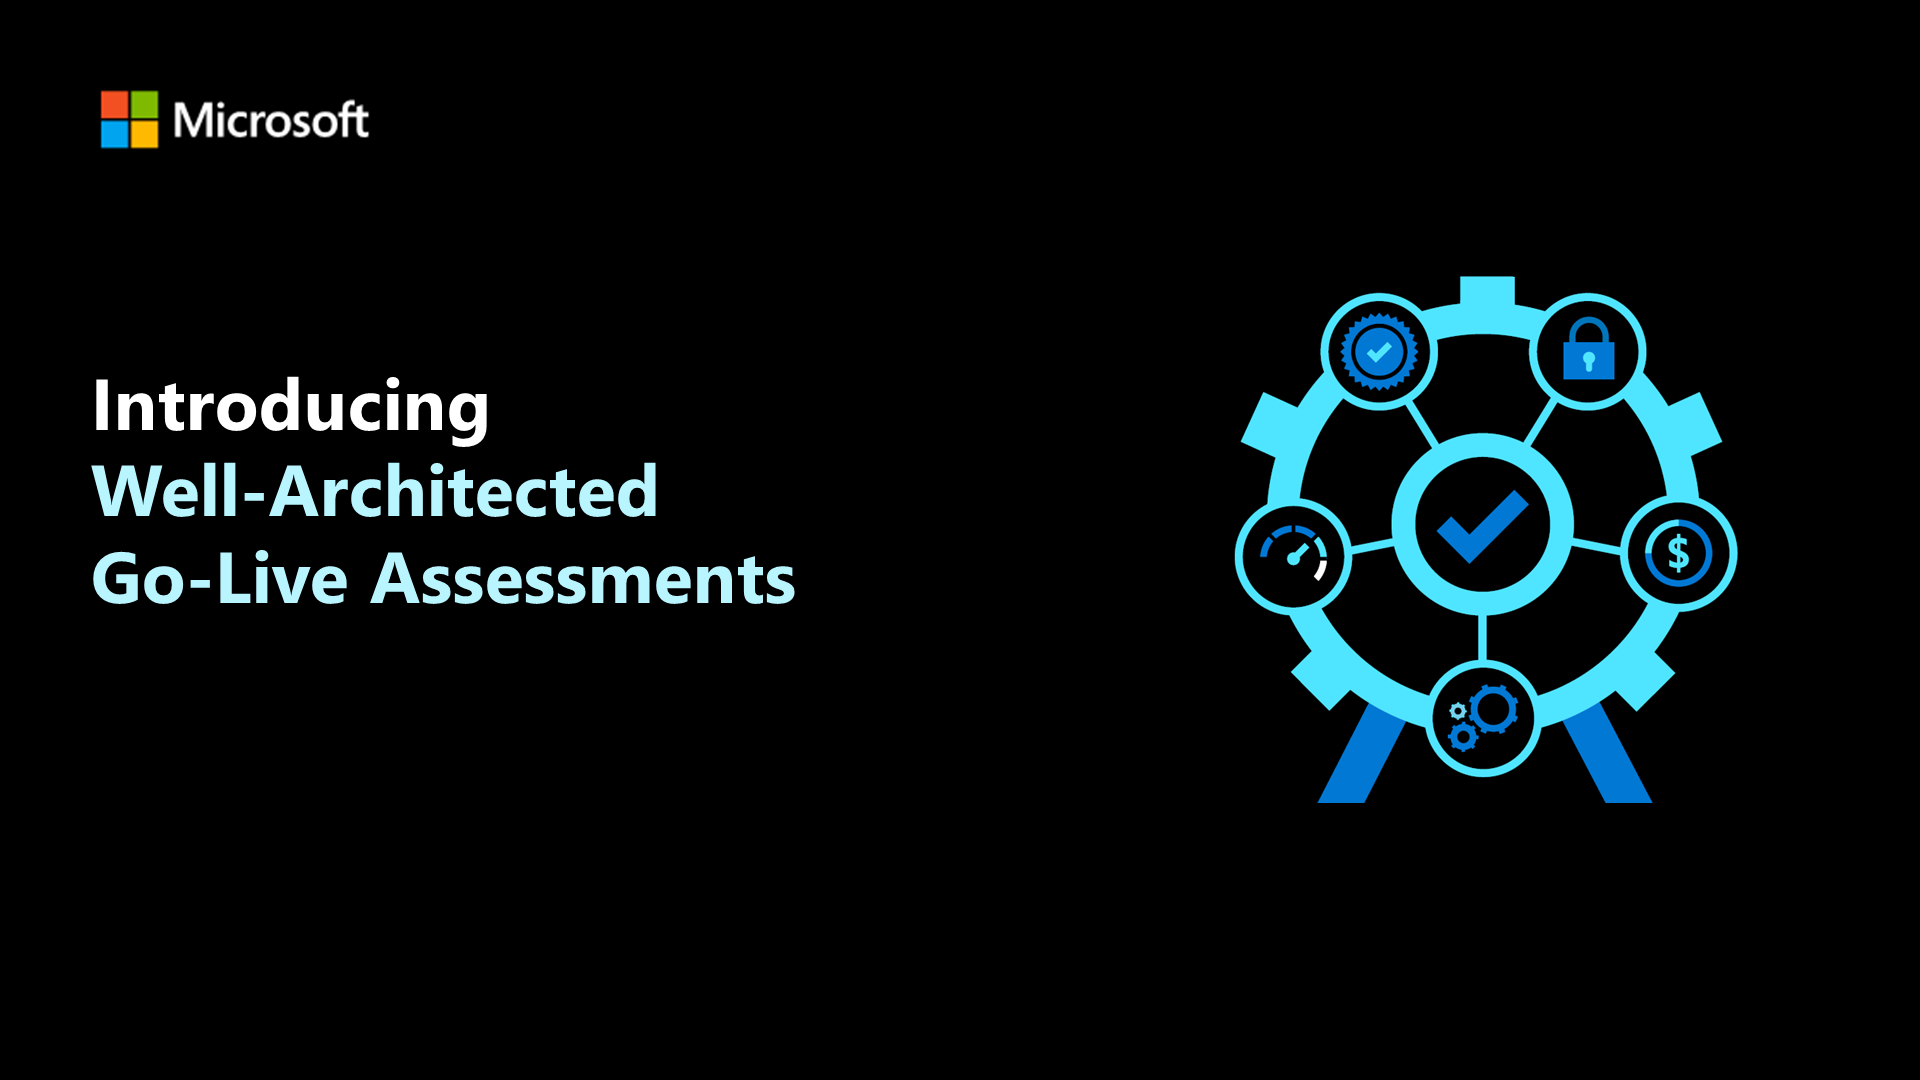 Well-Architected Go-Live now available on the Microsoft Assessment Platform